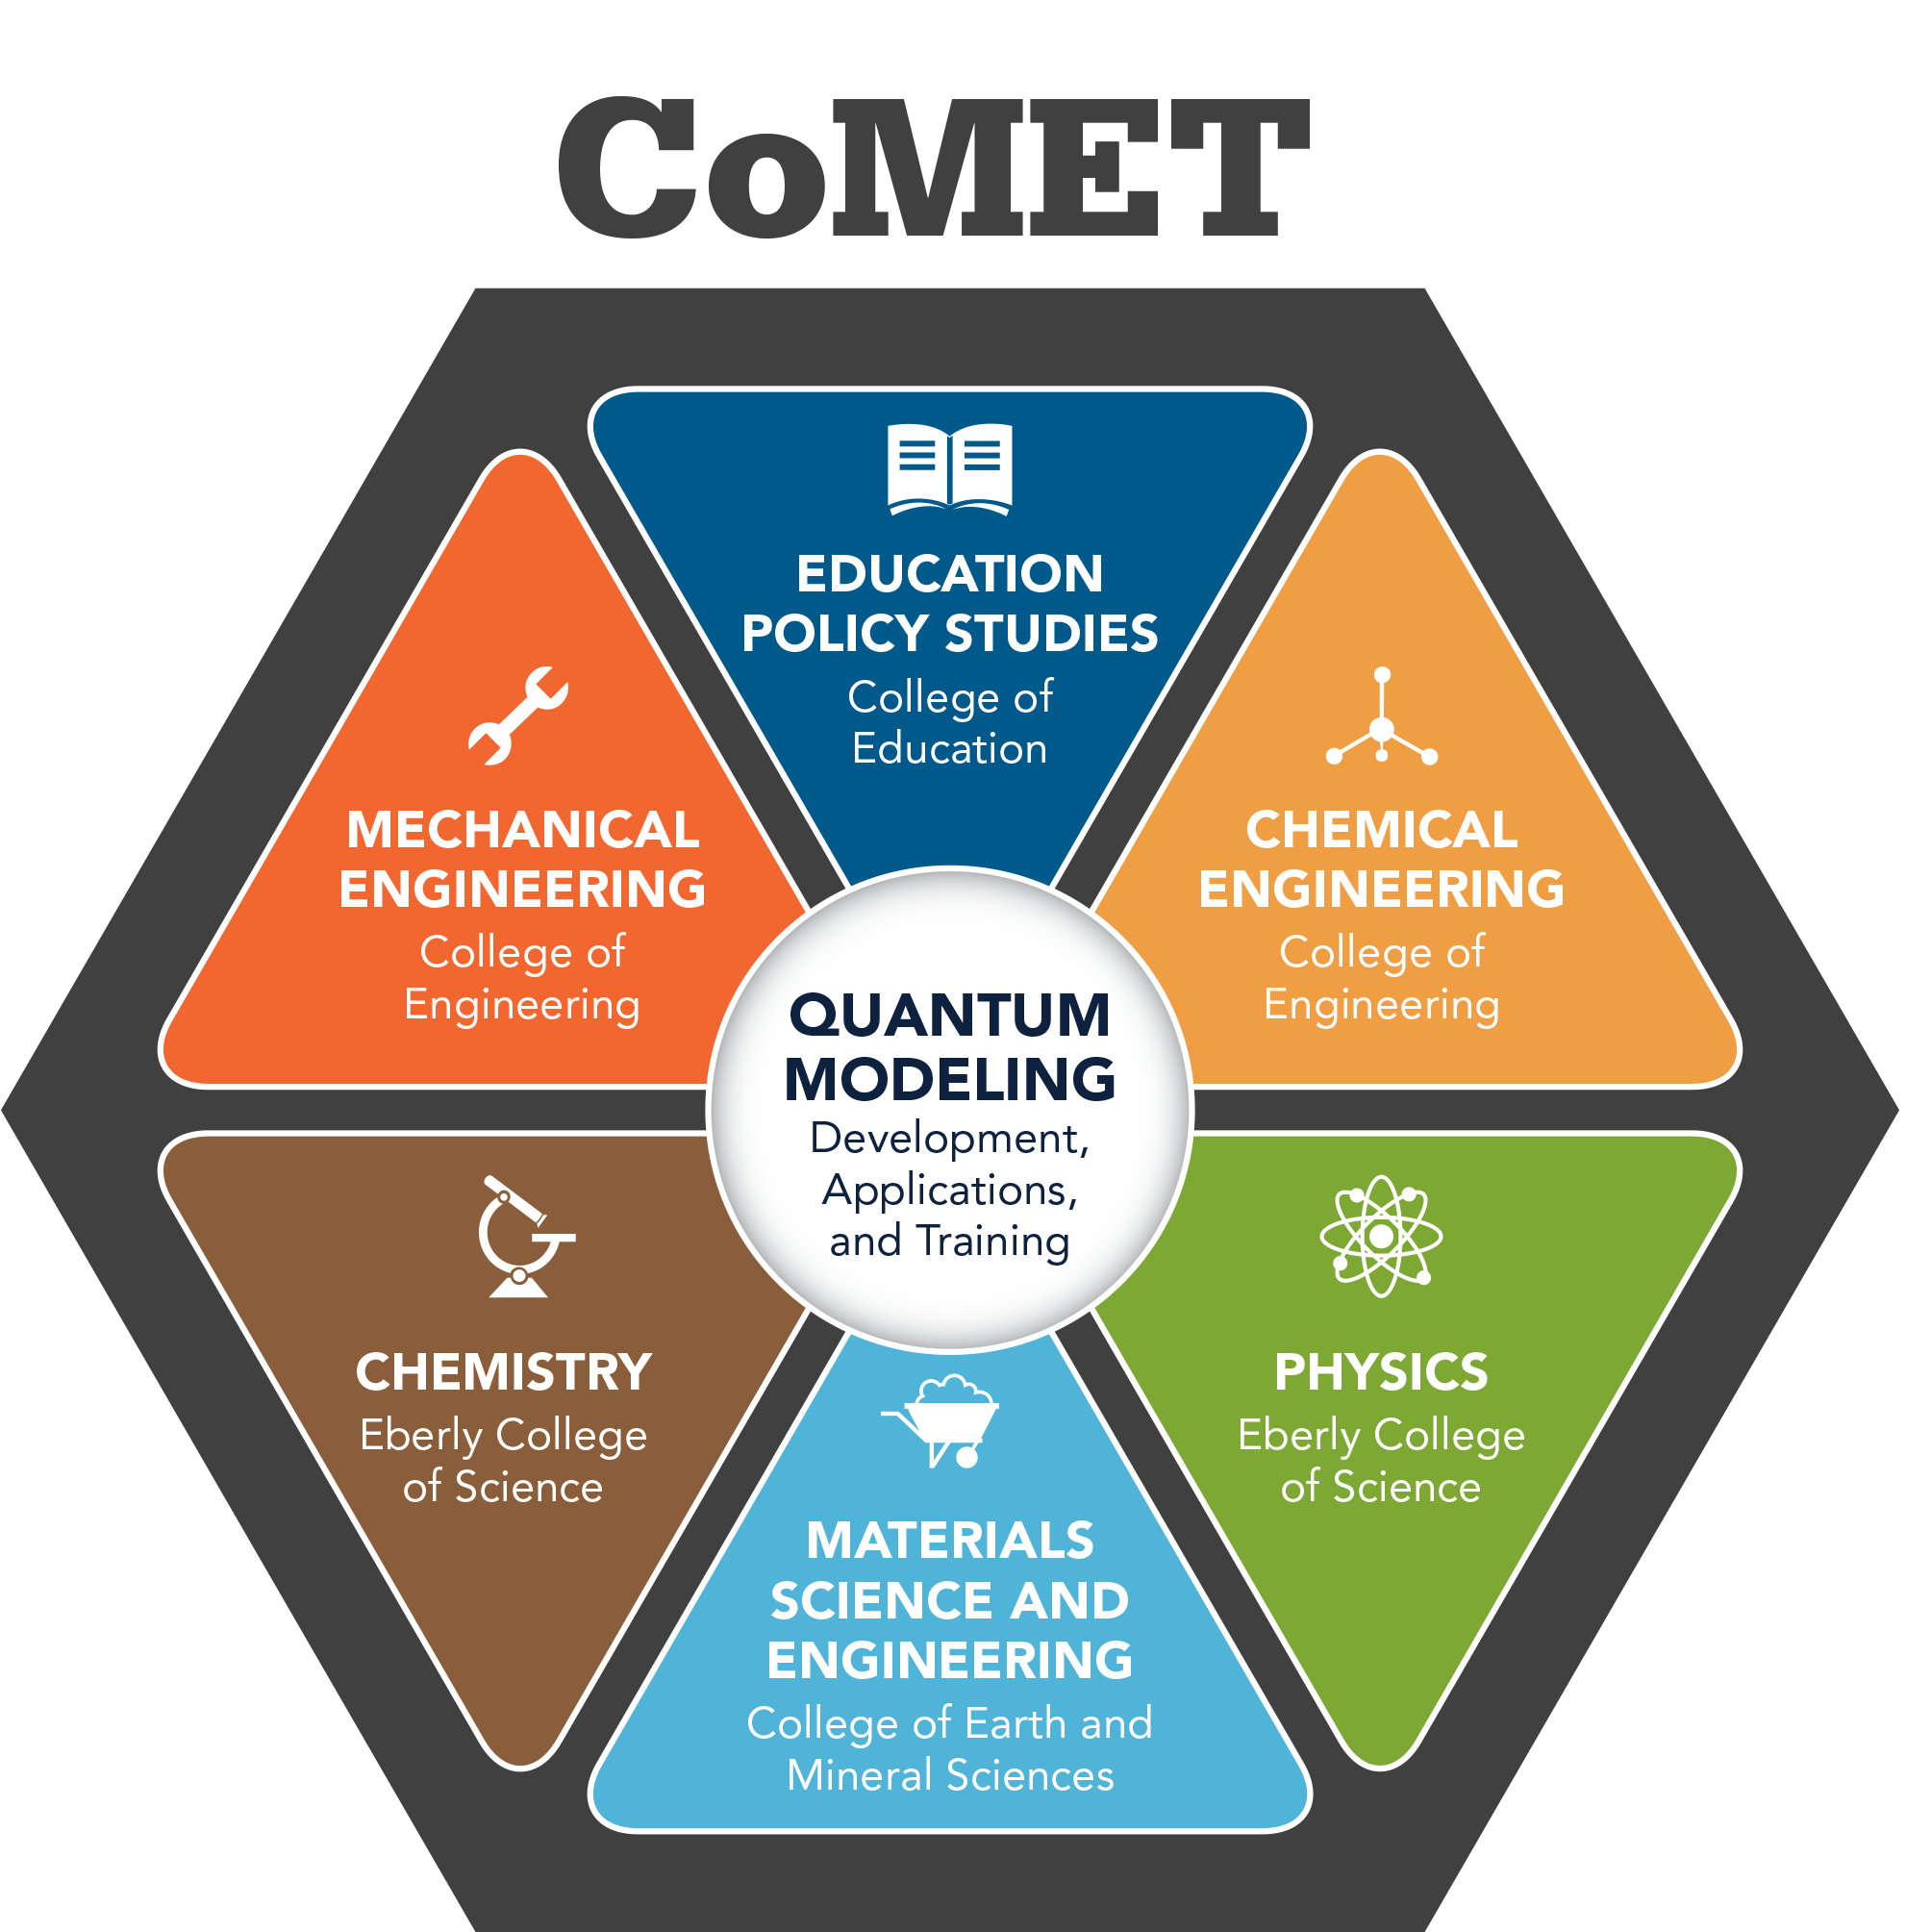 CoMET embraces students from a wide variety of STEM disciplines 